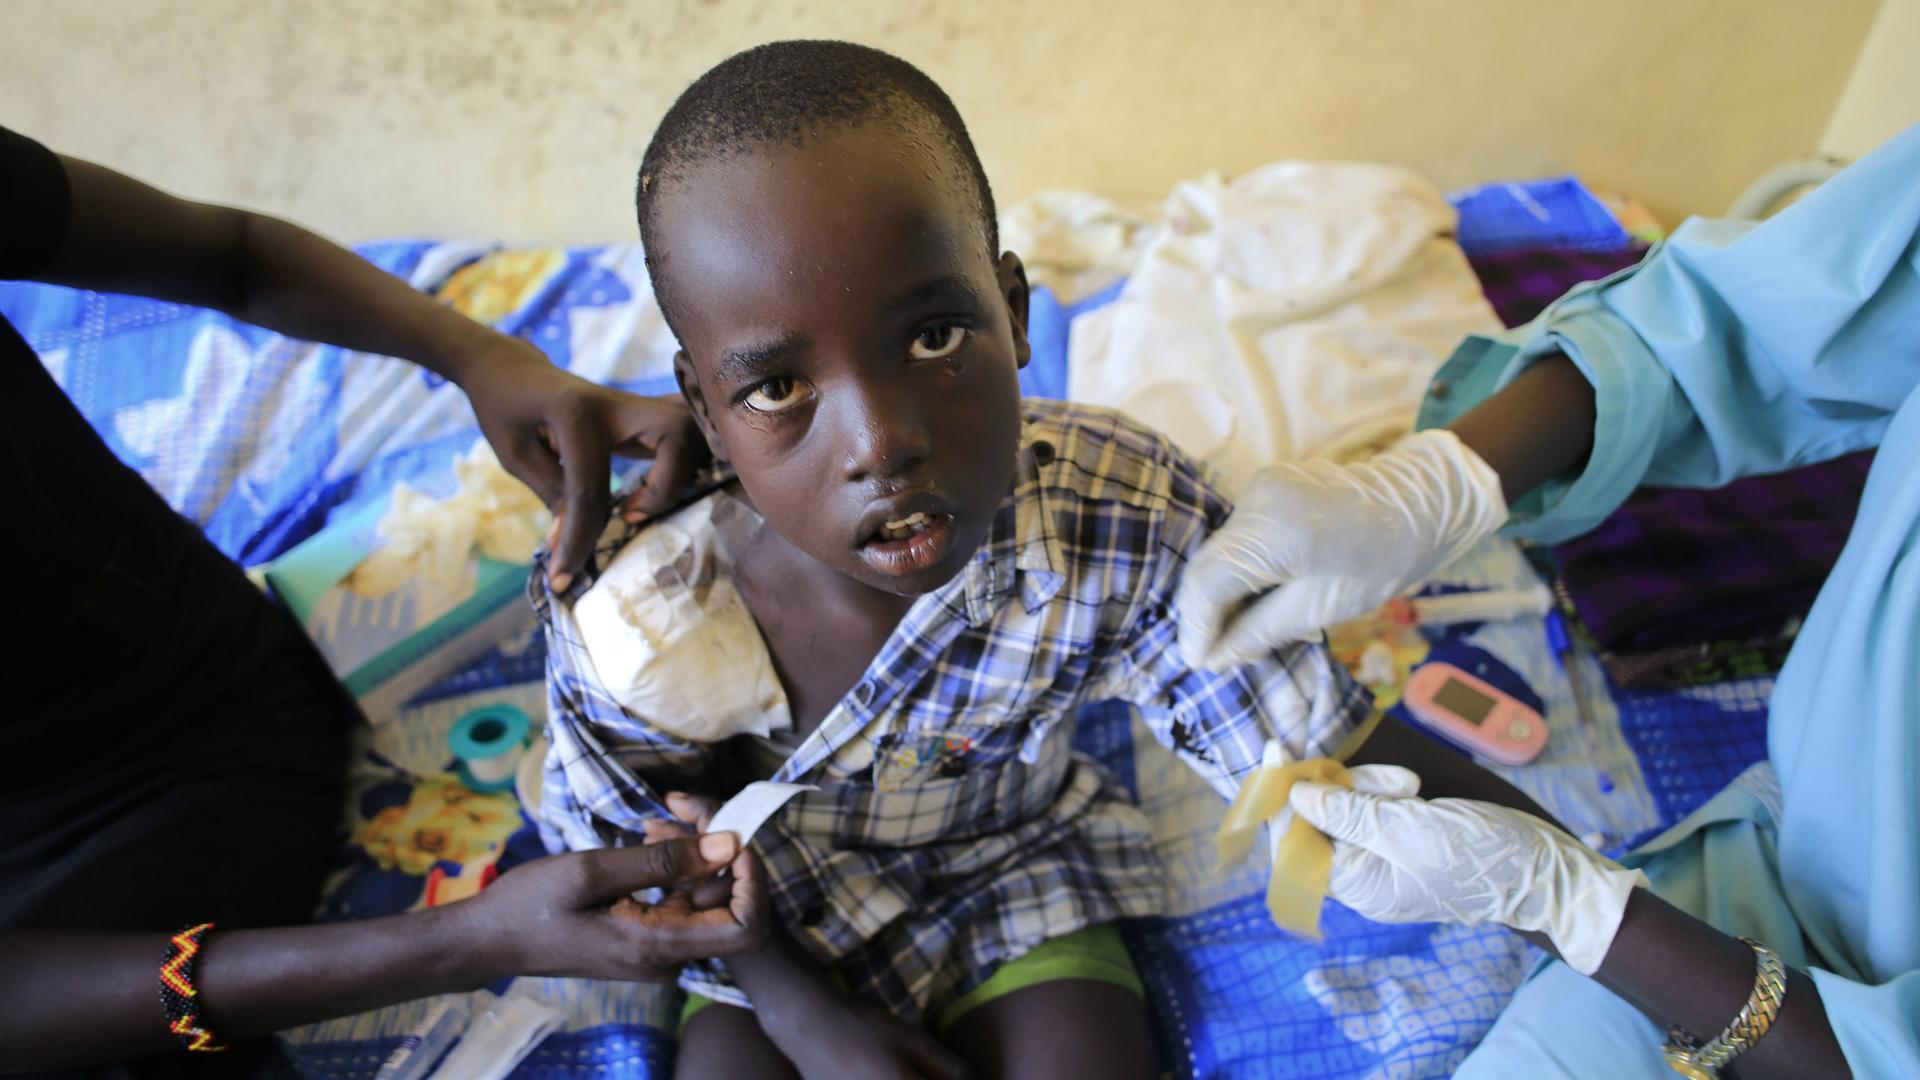 A wounded child undergoes medical treatment in Juba, South Sudan, Dec. 28, 2013.